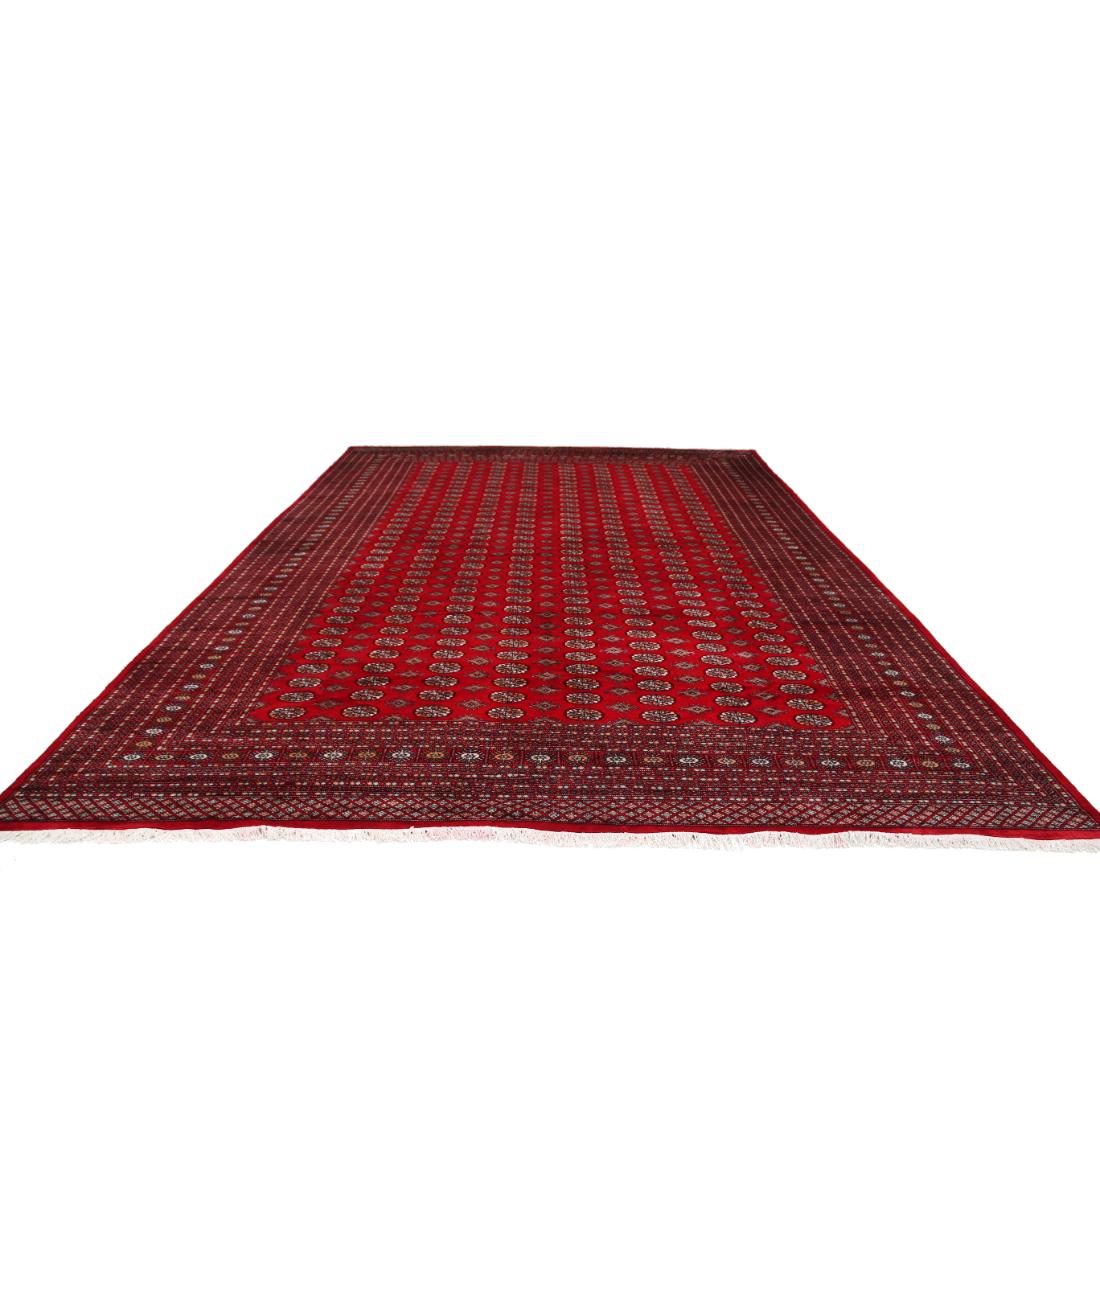 Bokhara 12' 0" X 17' 10" Hand-Knotted Wool Rug 12' 0" X 17' 10" (366 X 544) / Red / Black